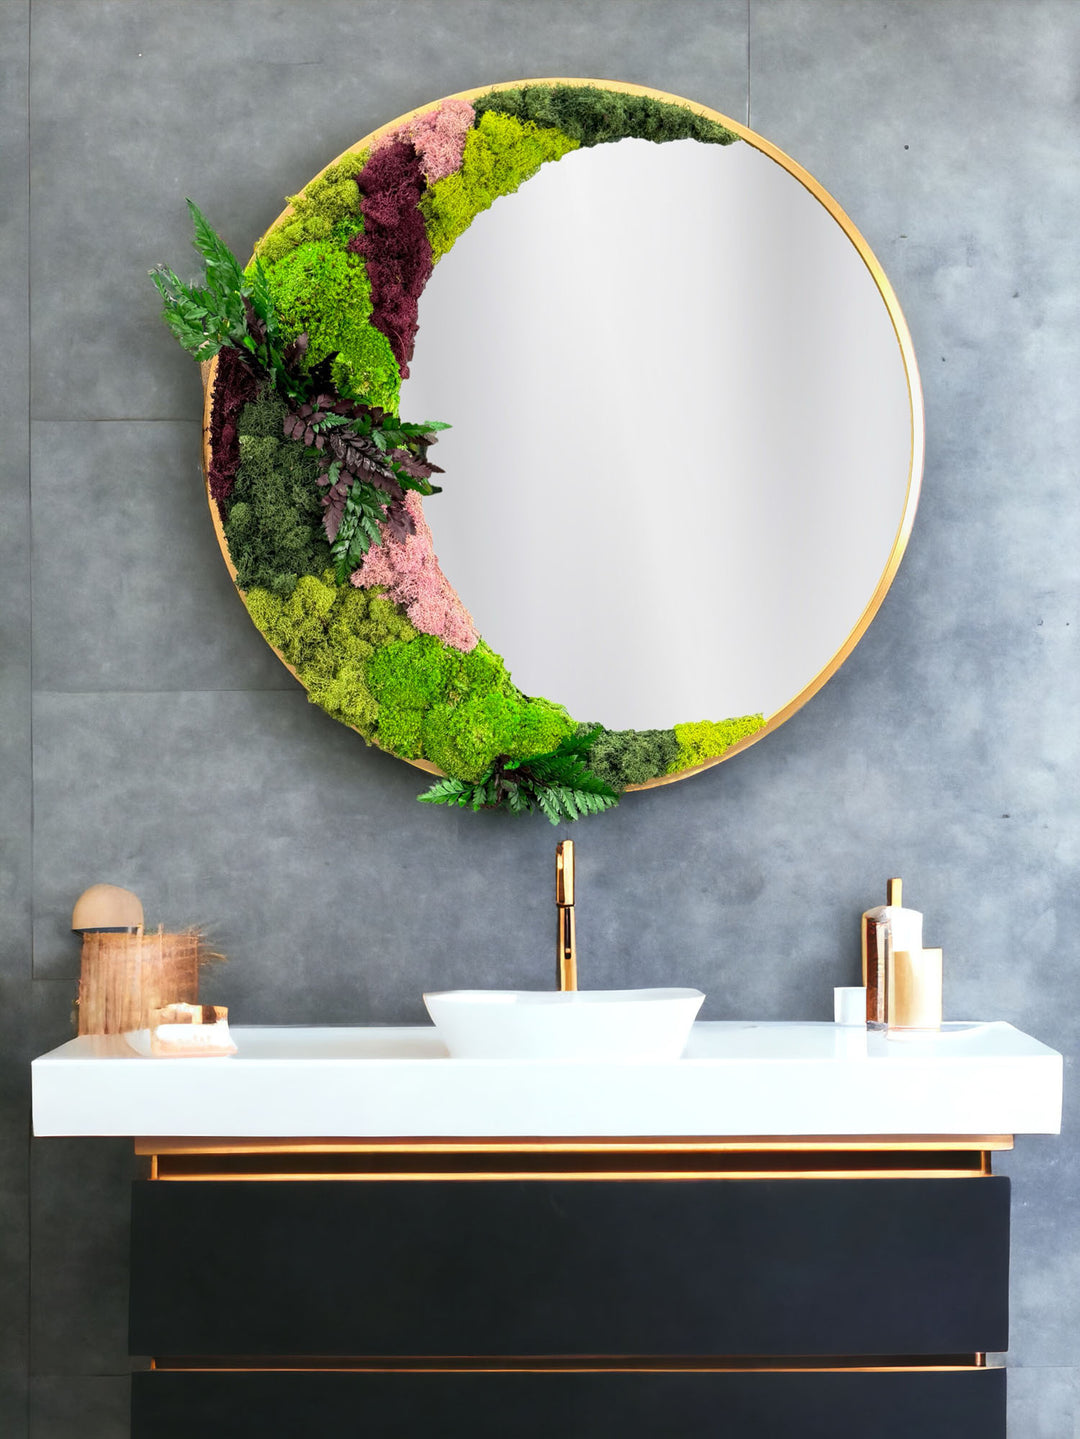 Circular Mirror with Lush Preserved Moss and Botanical Accents - MossFusion